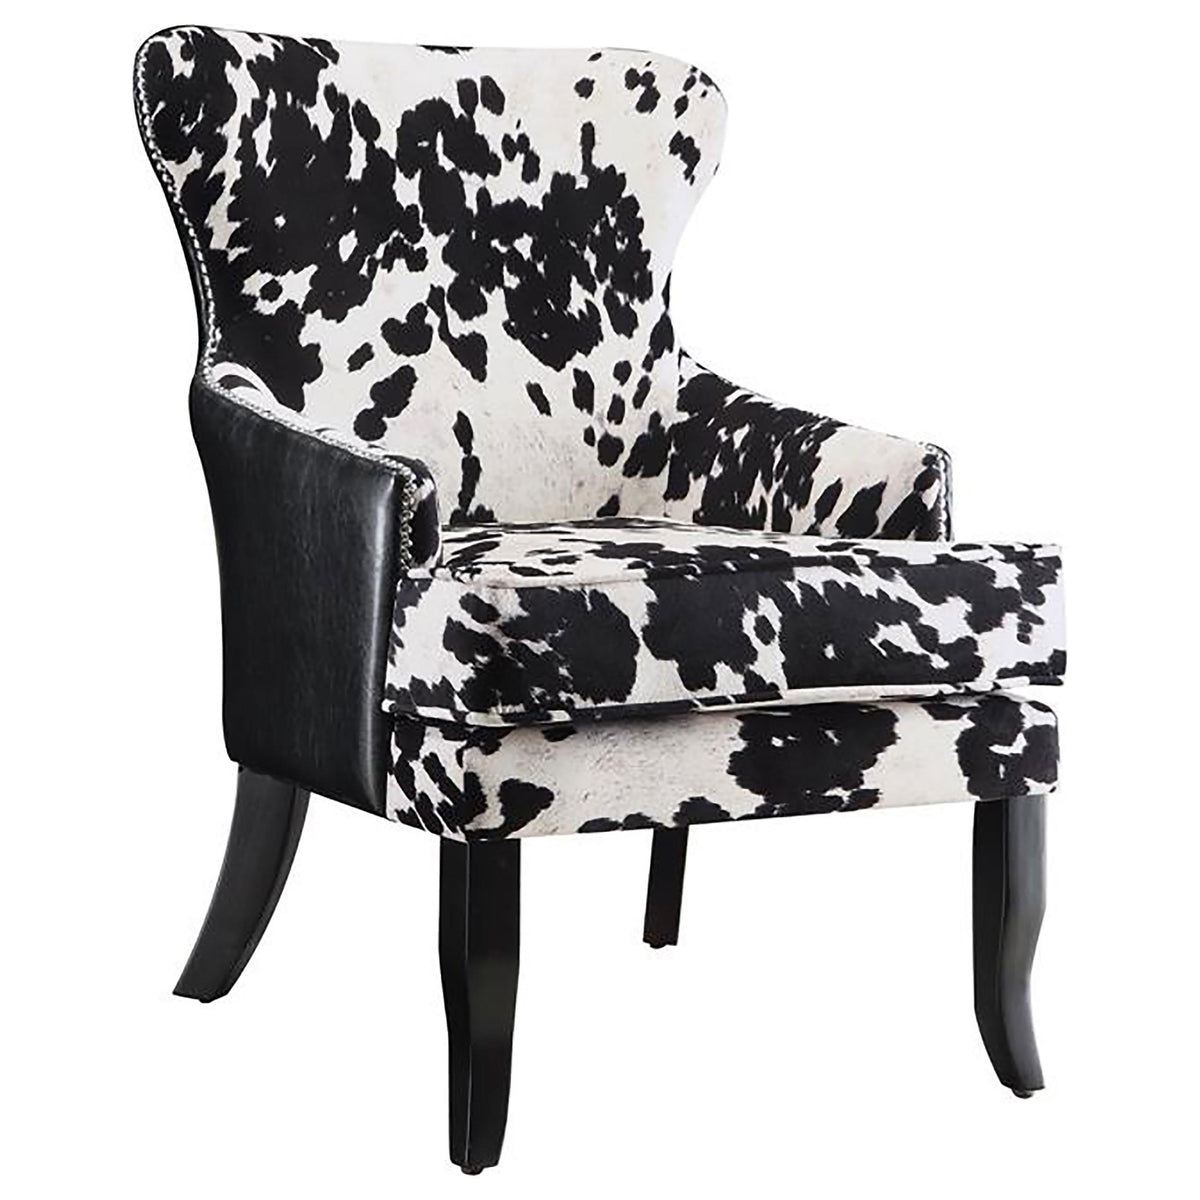 Trea Cowhide Print Accent Chair Black and White Trea Cowhide Print Accent Chair Black and White Half Price Furniture